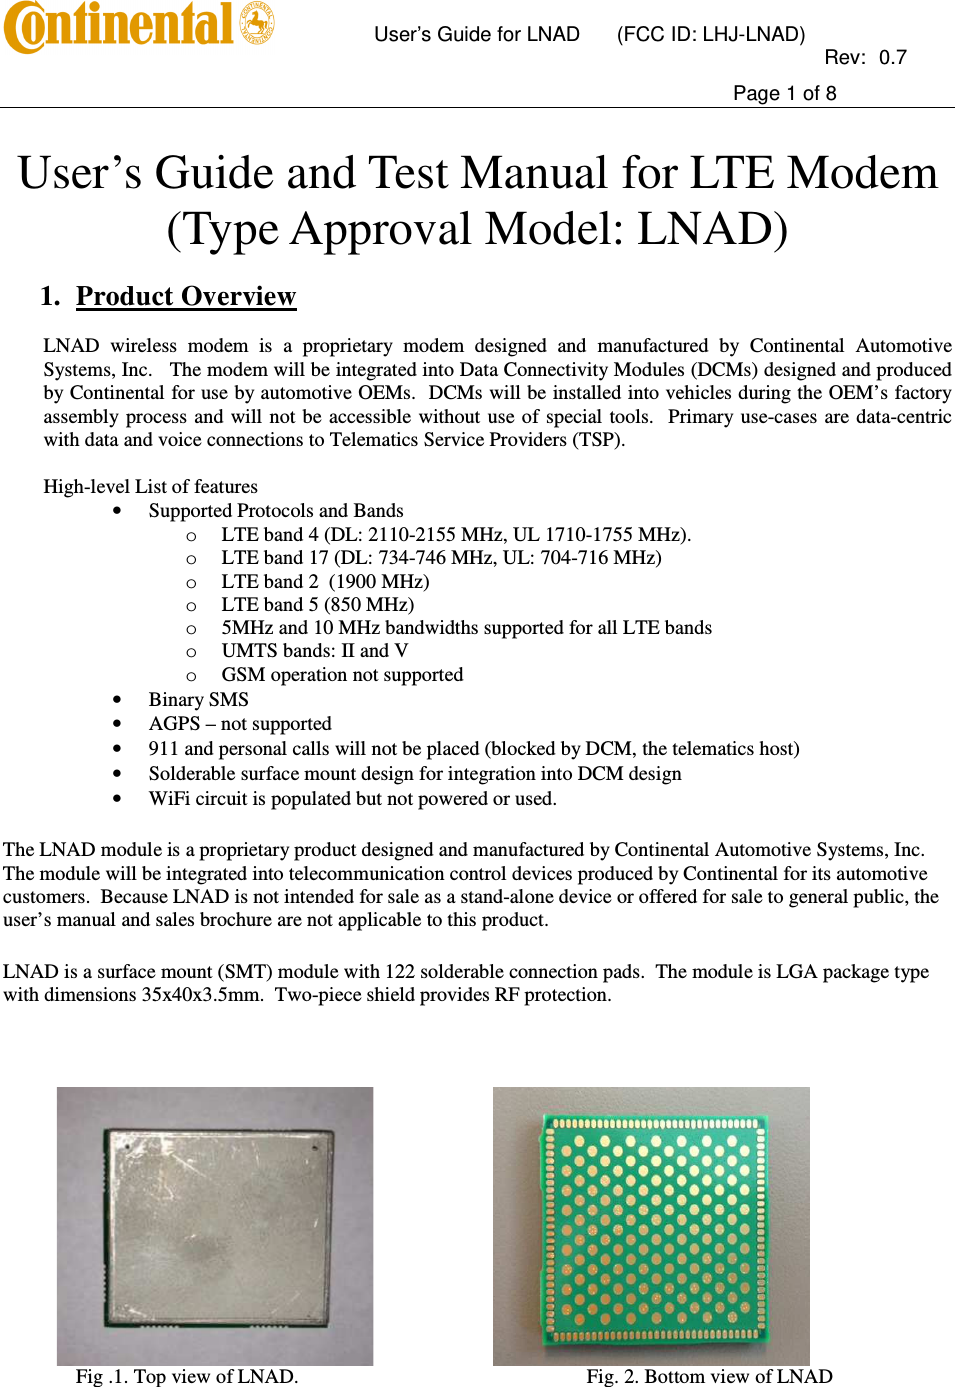       User’s Guide for LNAD  (FCC ID: LHJ-LNAD)          Rev:  0.7     Page 1 of 8   User’s Guide and Test Manual for LTE Modem   (Type Approval Model: LNAD)  1. Product Overview  LNAD  wireless  modem  is  a  proprietary  modem  designed  and  manufactured  by  Continental  Automotive Systems, Inc.   The modem will be integrated into Data Connectivity Modules (DCMs) designed and produced by Continental for use by automotive OEMs.  DCMs will be installed into vehicles during the OEM’s factory assembly process and will not be accessible without use of  special  tools.  Primary use-cases are  data-centric with data and voice connections to Telematics Service Providers (TSP).   High-level List of features • Supported Protocols and Bands  o LTE band 4 (DL: 2110-2155 MHz, UL 1710-1755 MHz).  o LTE band 17 (DL: 734-746 MHz, UL: 704-716 MHz) o LTE band 2  (1900 MHz) o LTE band 5 (850 MHz) o 5MHz and 10 MHz bandwidths supported for all LTE bands o UMTS bands: II and V  o GSM operation not supported • Binary SMS • AGPS – not supported  • 911 and personal calls will not be placed (blocked by DCM, the telematics host) • Solderable surface mount design for integration into DCM design • WiFi circuit is populated but not powered or used.  The LNAD module is a proprietary product designed and manufactured by Continental Automotive Systems, Inc. The module will be integrated into telecommunication control devices produced by Continental for its automotive customers.  Because LNAD is not intended for sale as a stand-alone device or offered for sale to general public, the user’s manual and sales brochure are not applicable to this product.   LNAD is a surface mount (SMT) module with 122 solderable connection pads.  The module is LGA package type with dimensions 35x40x3.5mm.  Two-piece shield provides RF protection.                                         Fig .1. Top view of LNAD.         Fig. 2. Bottom view of LNAD  